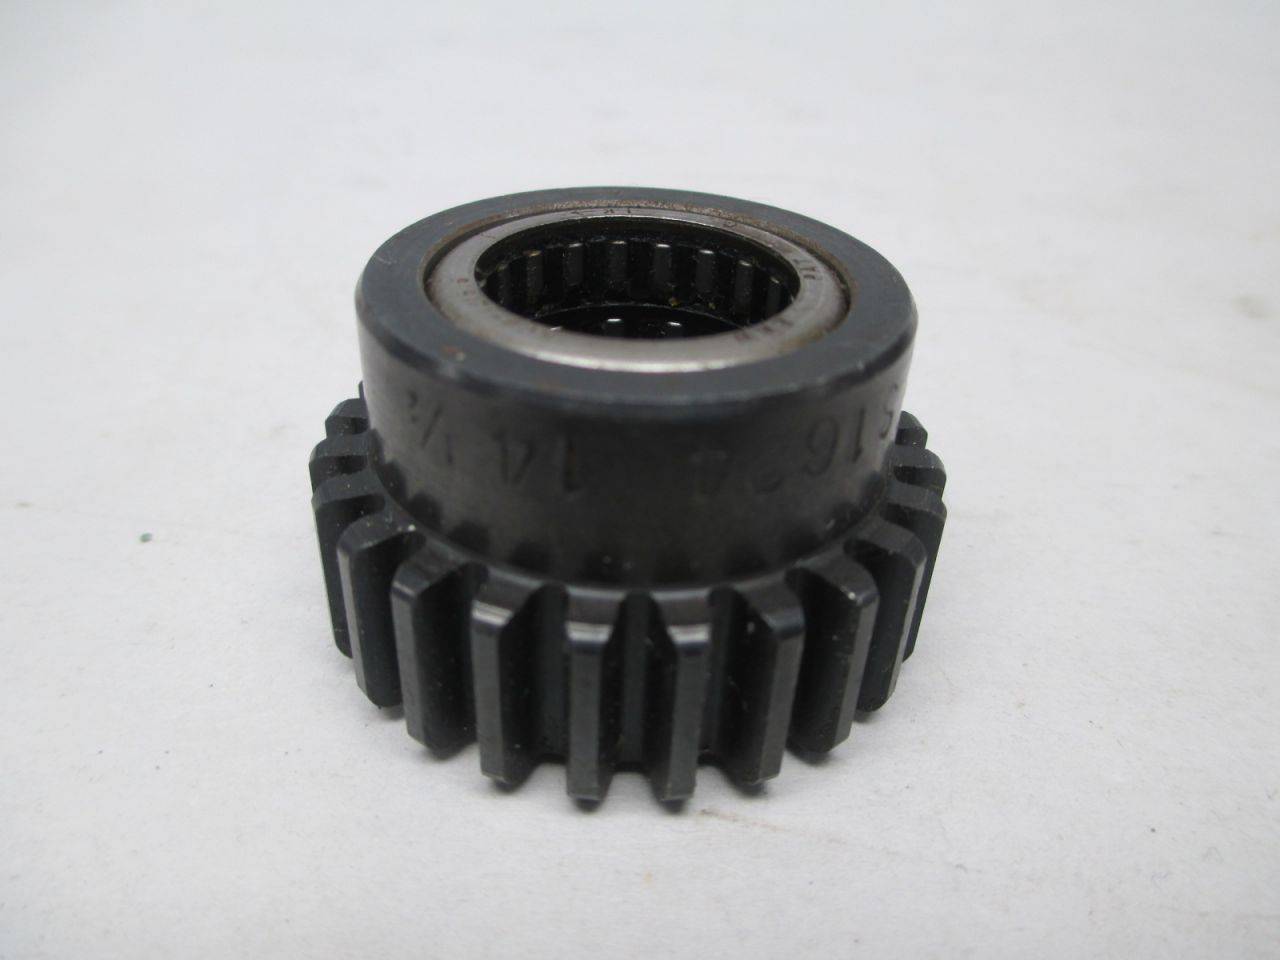 3/4 in Bore 12 DP 14.5 ° Pressure Angle 22 Teeth Finished Bore 2 in Outside Diameter Martin Sprocket & Gear S1222BS 3/4 3/4 in Face Hub with Key External Tooth Spur Gear 